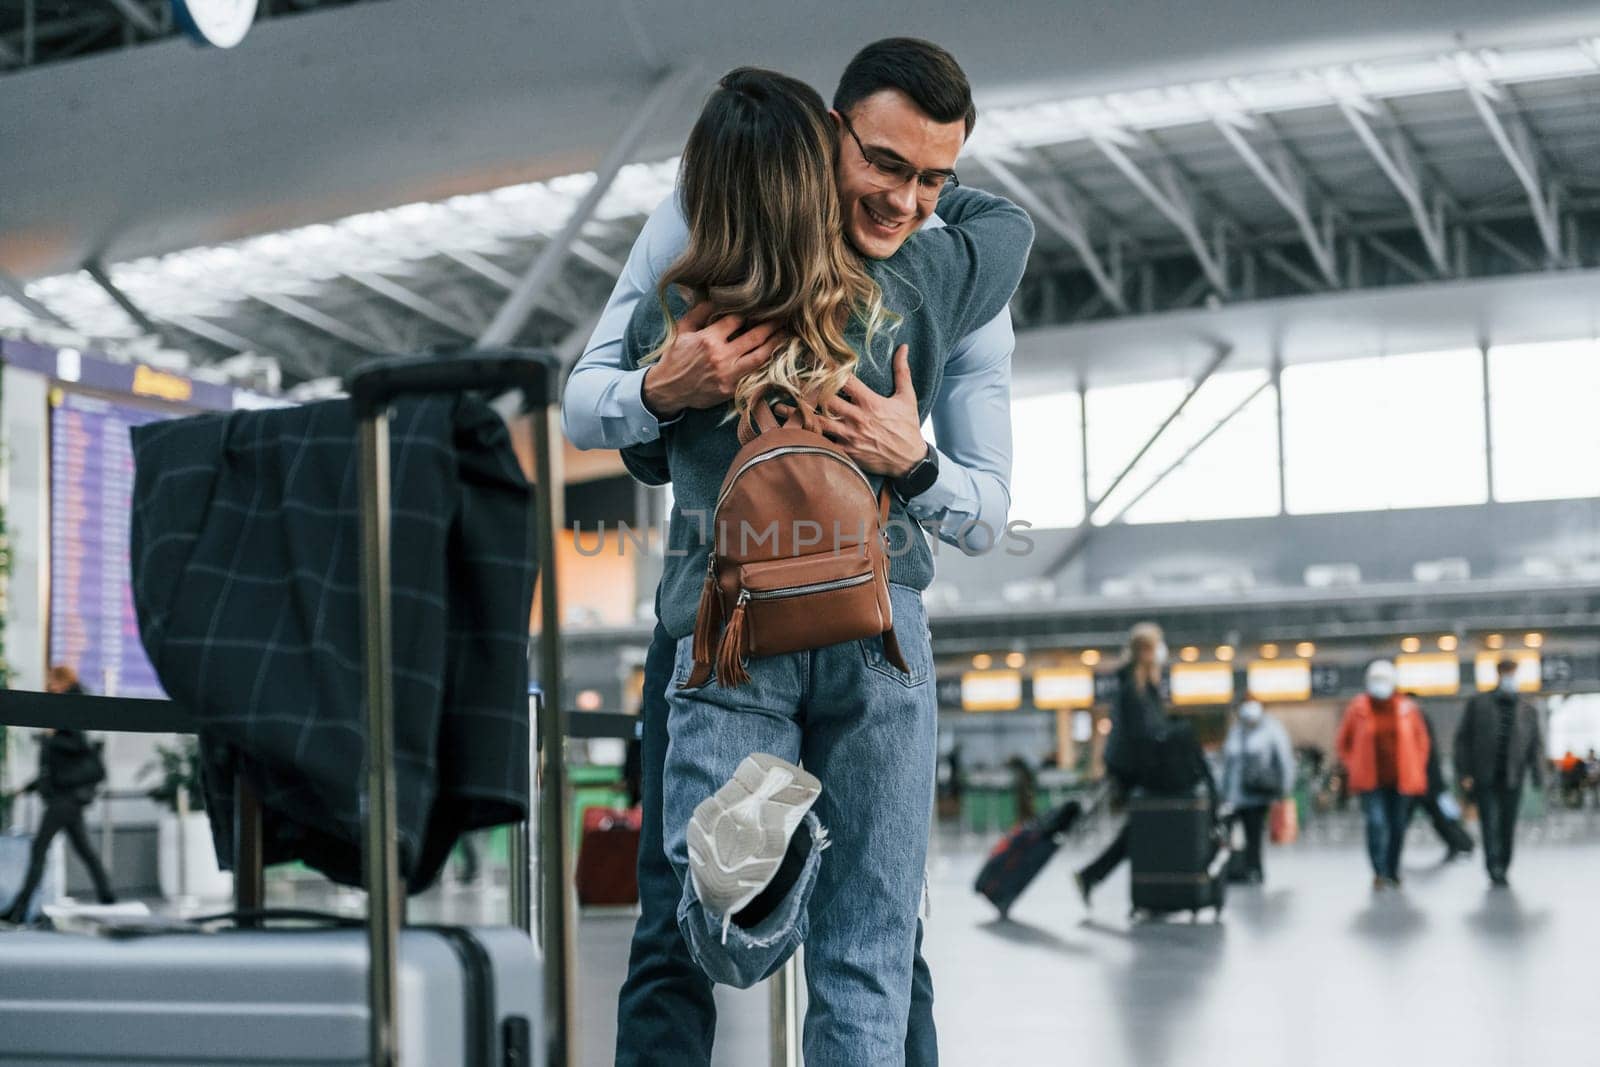 Embracing each other. Young couple is in the airport together.